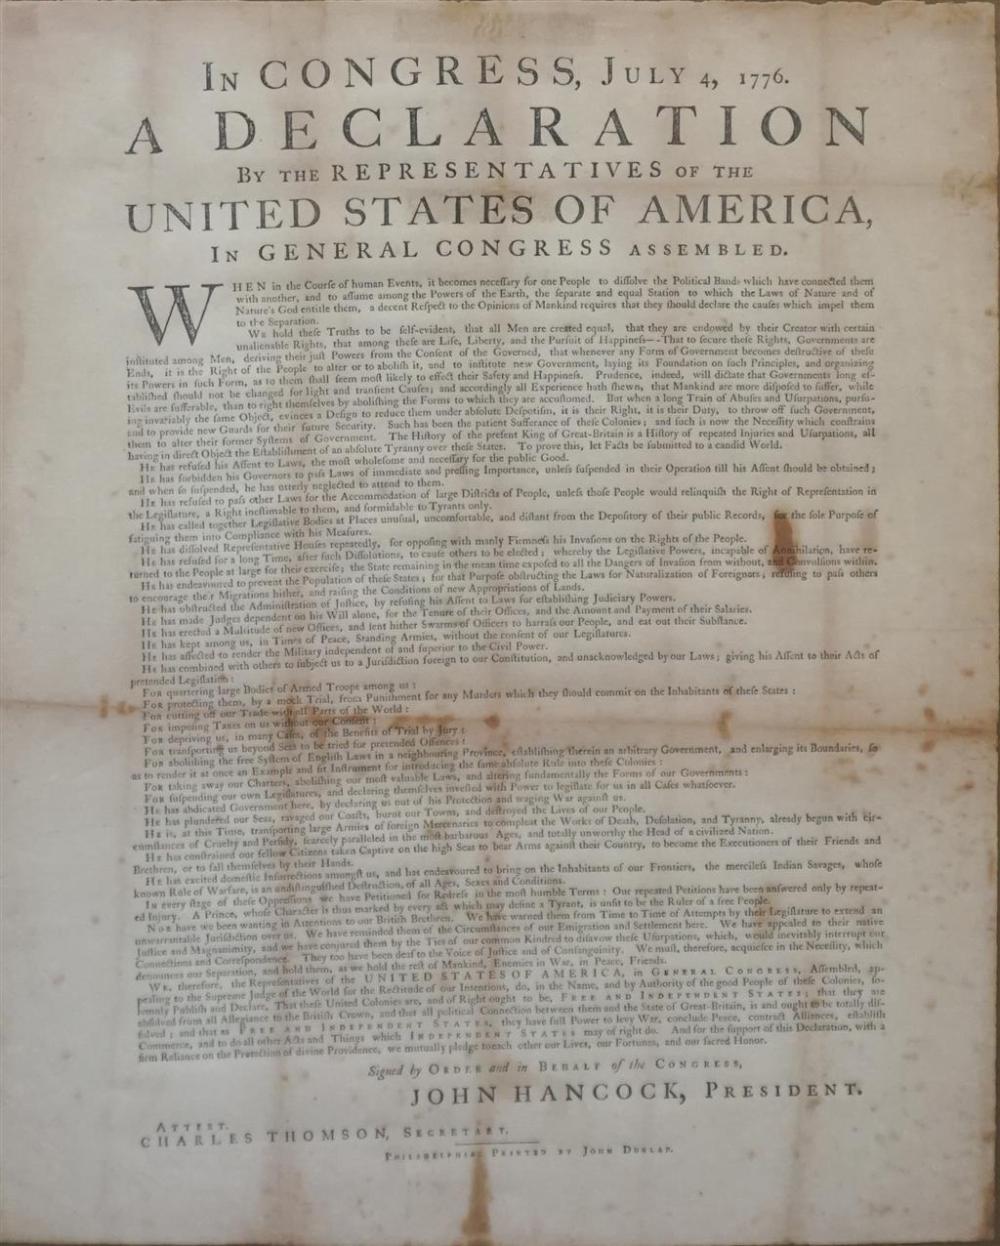 COPY OF THE DECLARATION OF INDEPENDENCE,